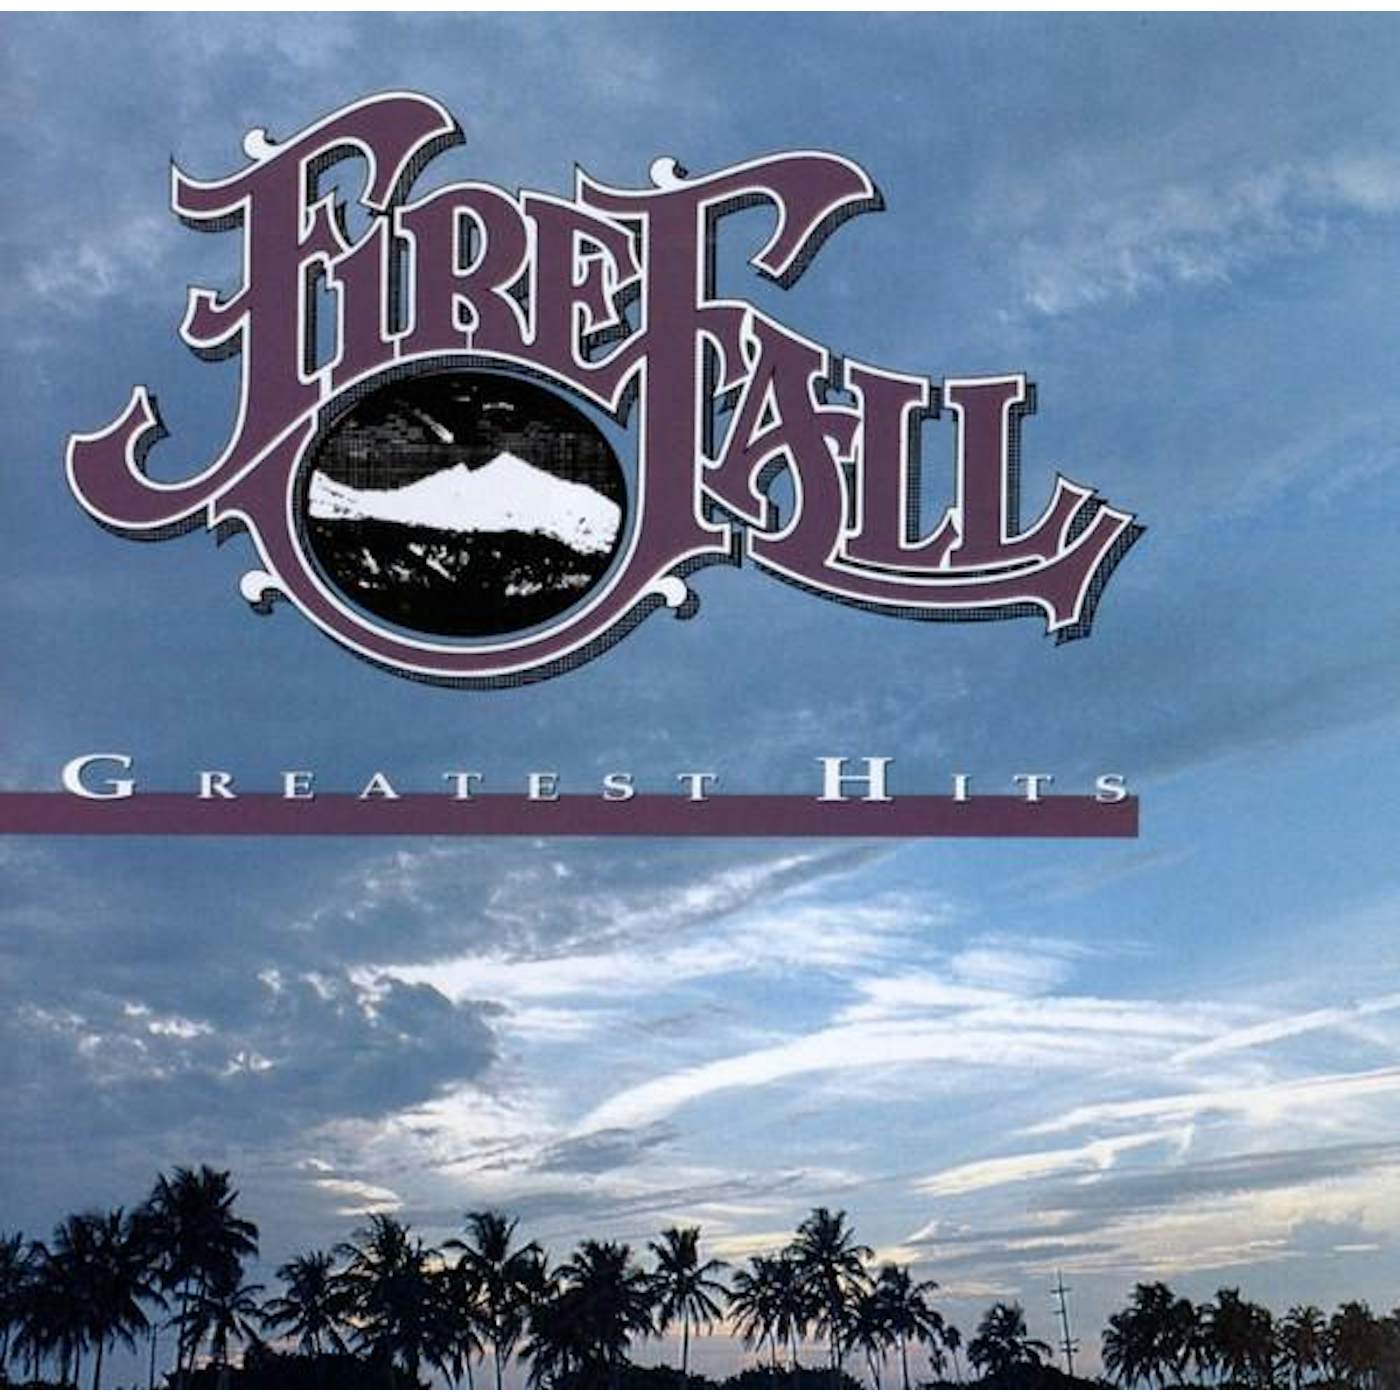 Firefall GREATEST HITS CD